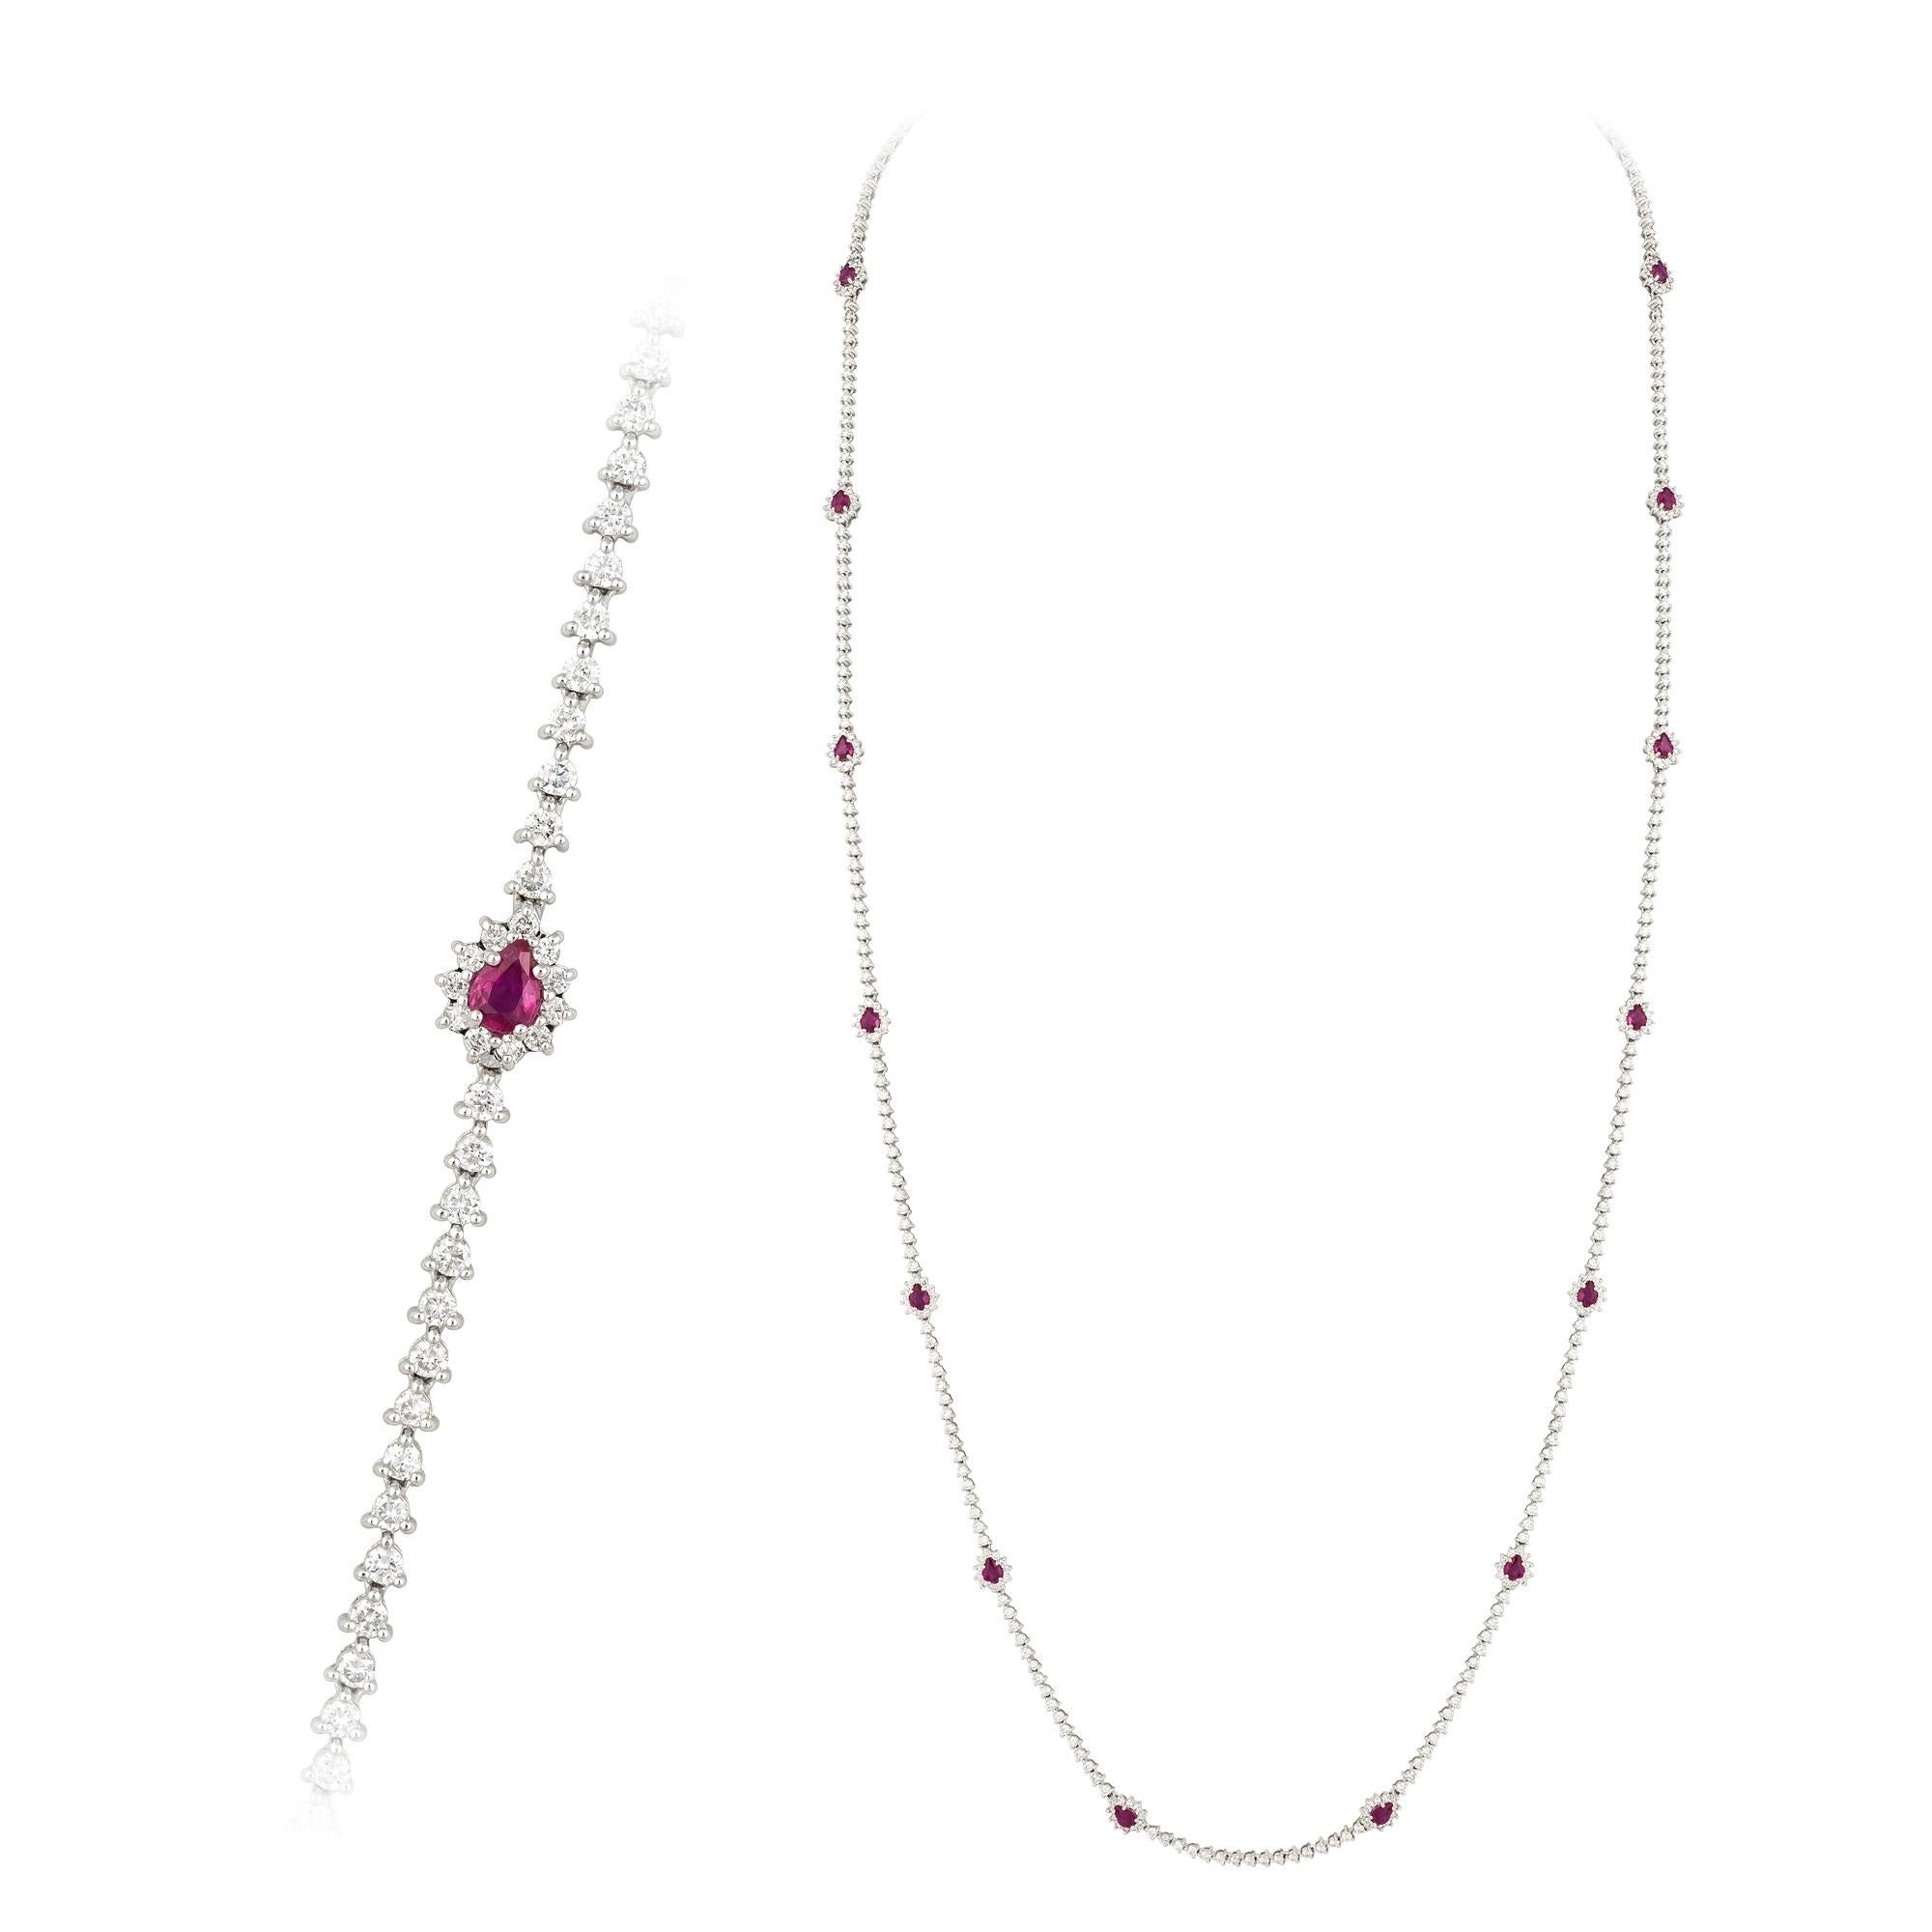 NECKLACE 18K White Gold 

Diamond 6.58 Cts/497 Pcs 
Ruby 3.27 Cts/19 Pcs

With a heritage of ancient fine Swiss jewelry traditions, NATKINA is a Geneva based jewellery brand, which creates modern jewellery masterpieces suitable for every day